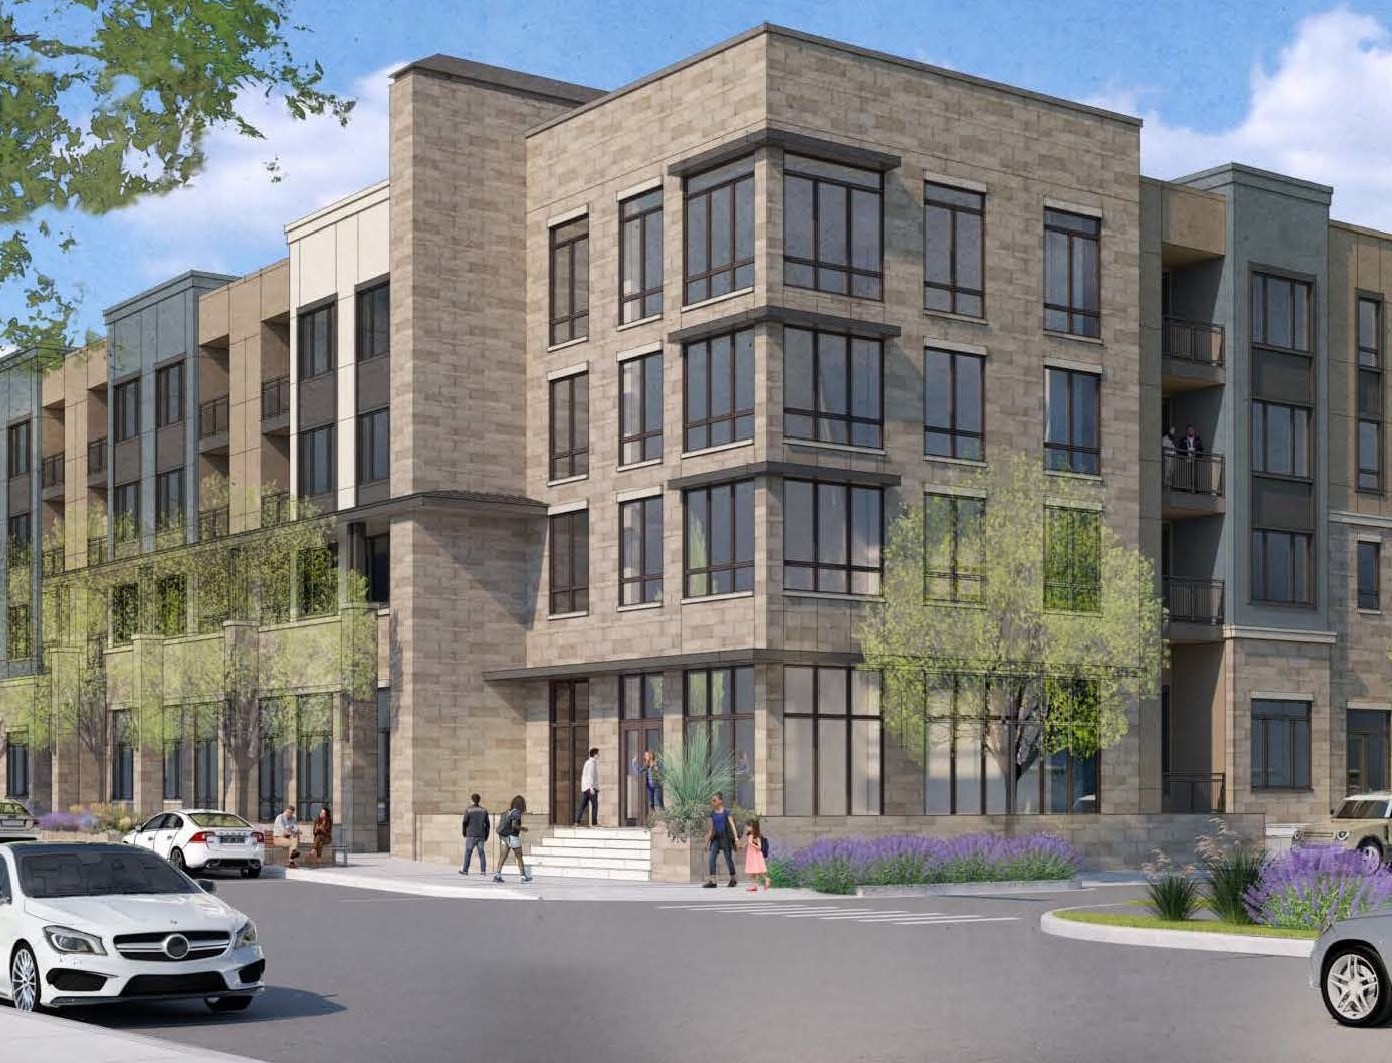 Embrey Announces Closing of Land Acquisition for 306-Unit Keene at The District Apartment Community in Centennial, Colorado